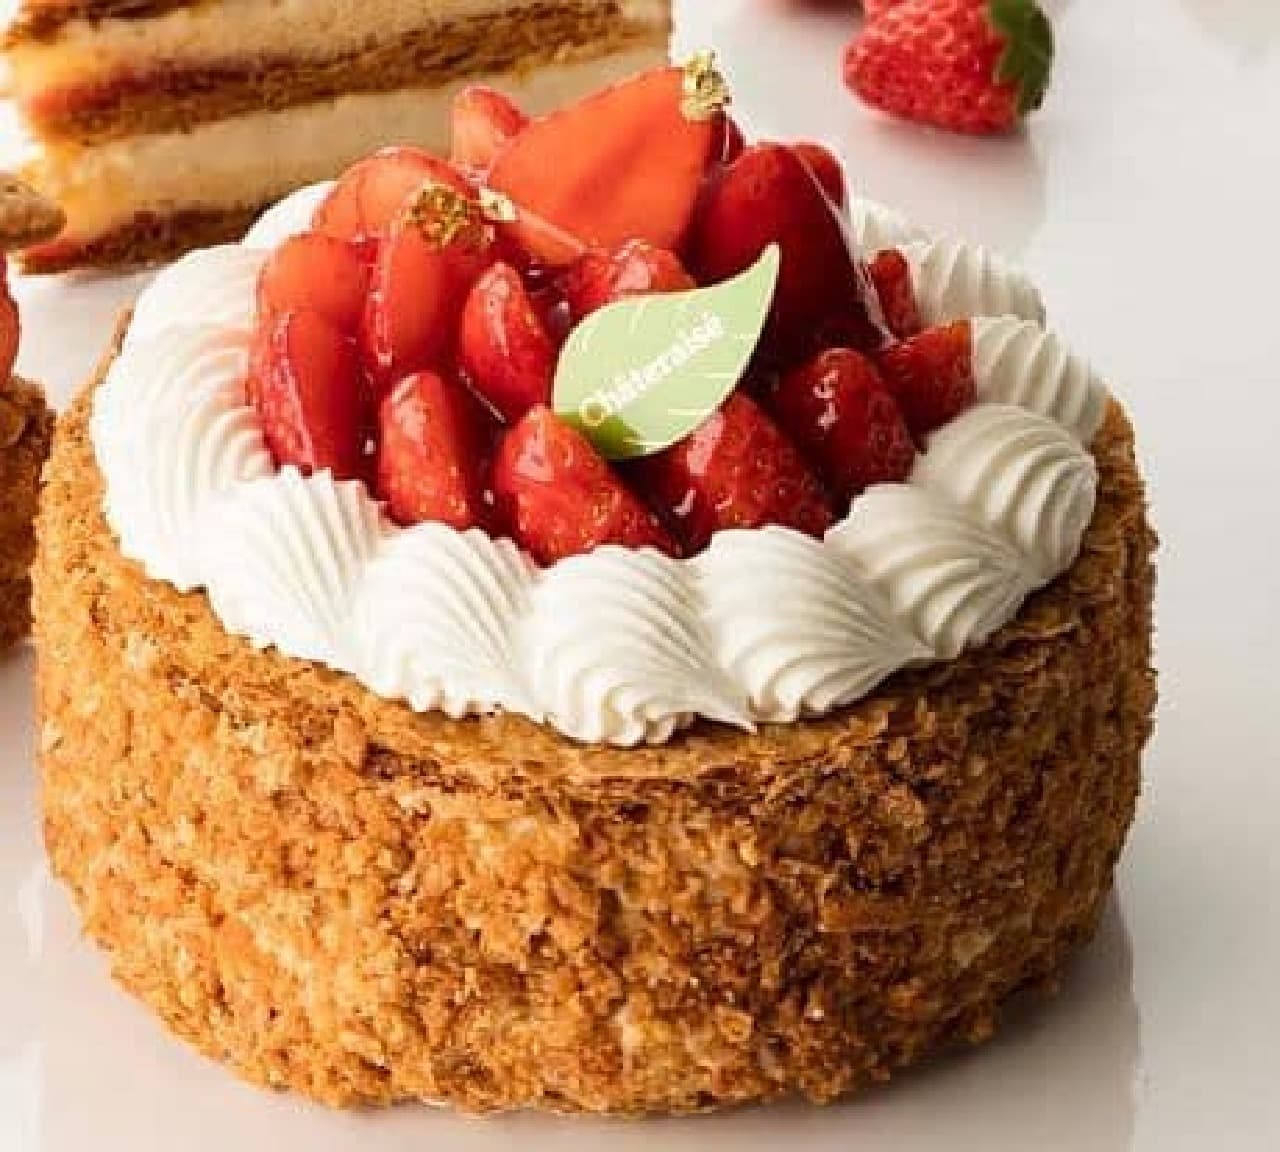 Chateraise "Butter-scented Napoleon Pie Box with Tochiotome Strawberries